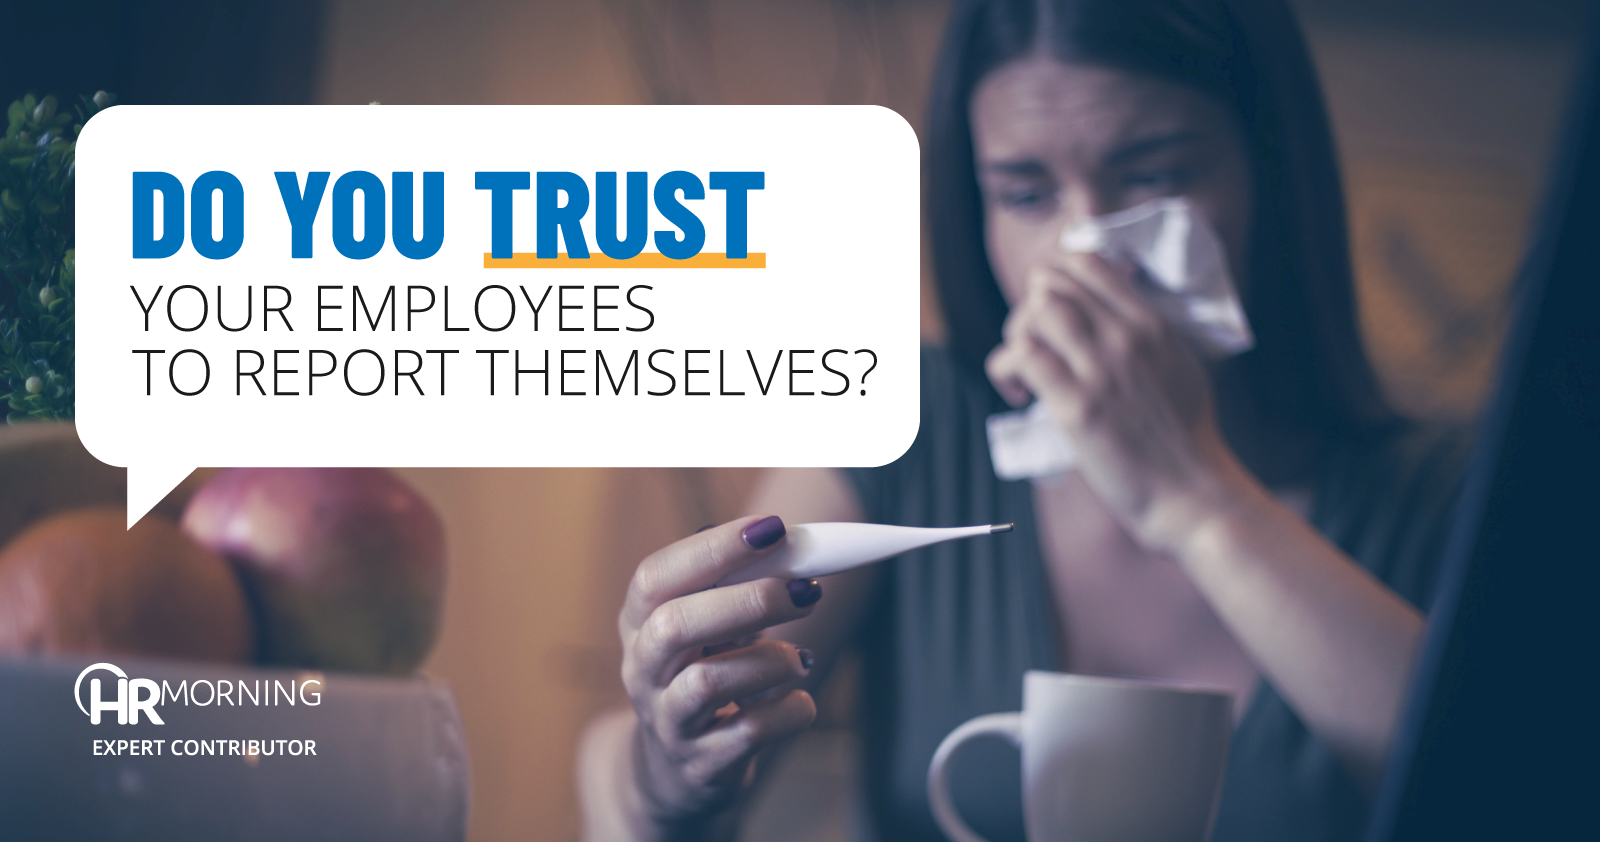 Do you trust your employees to report themselves